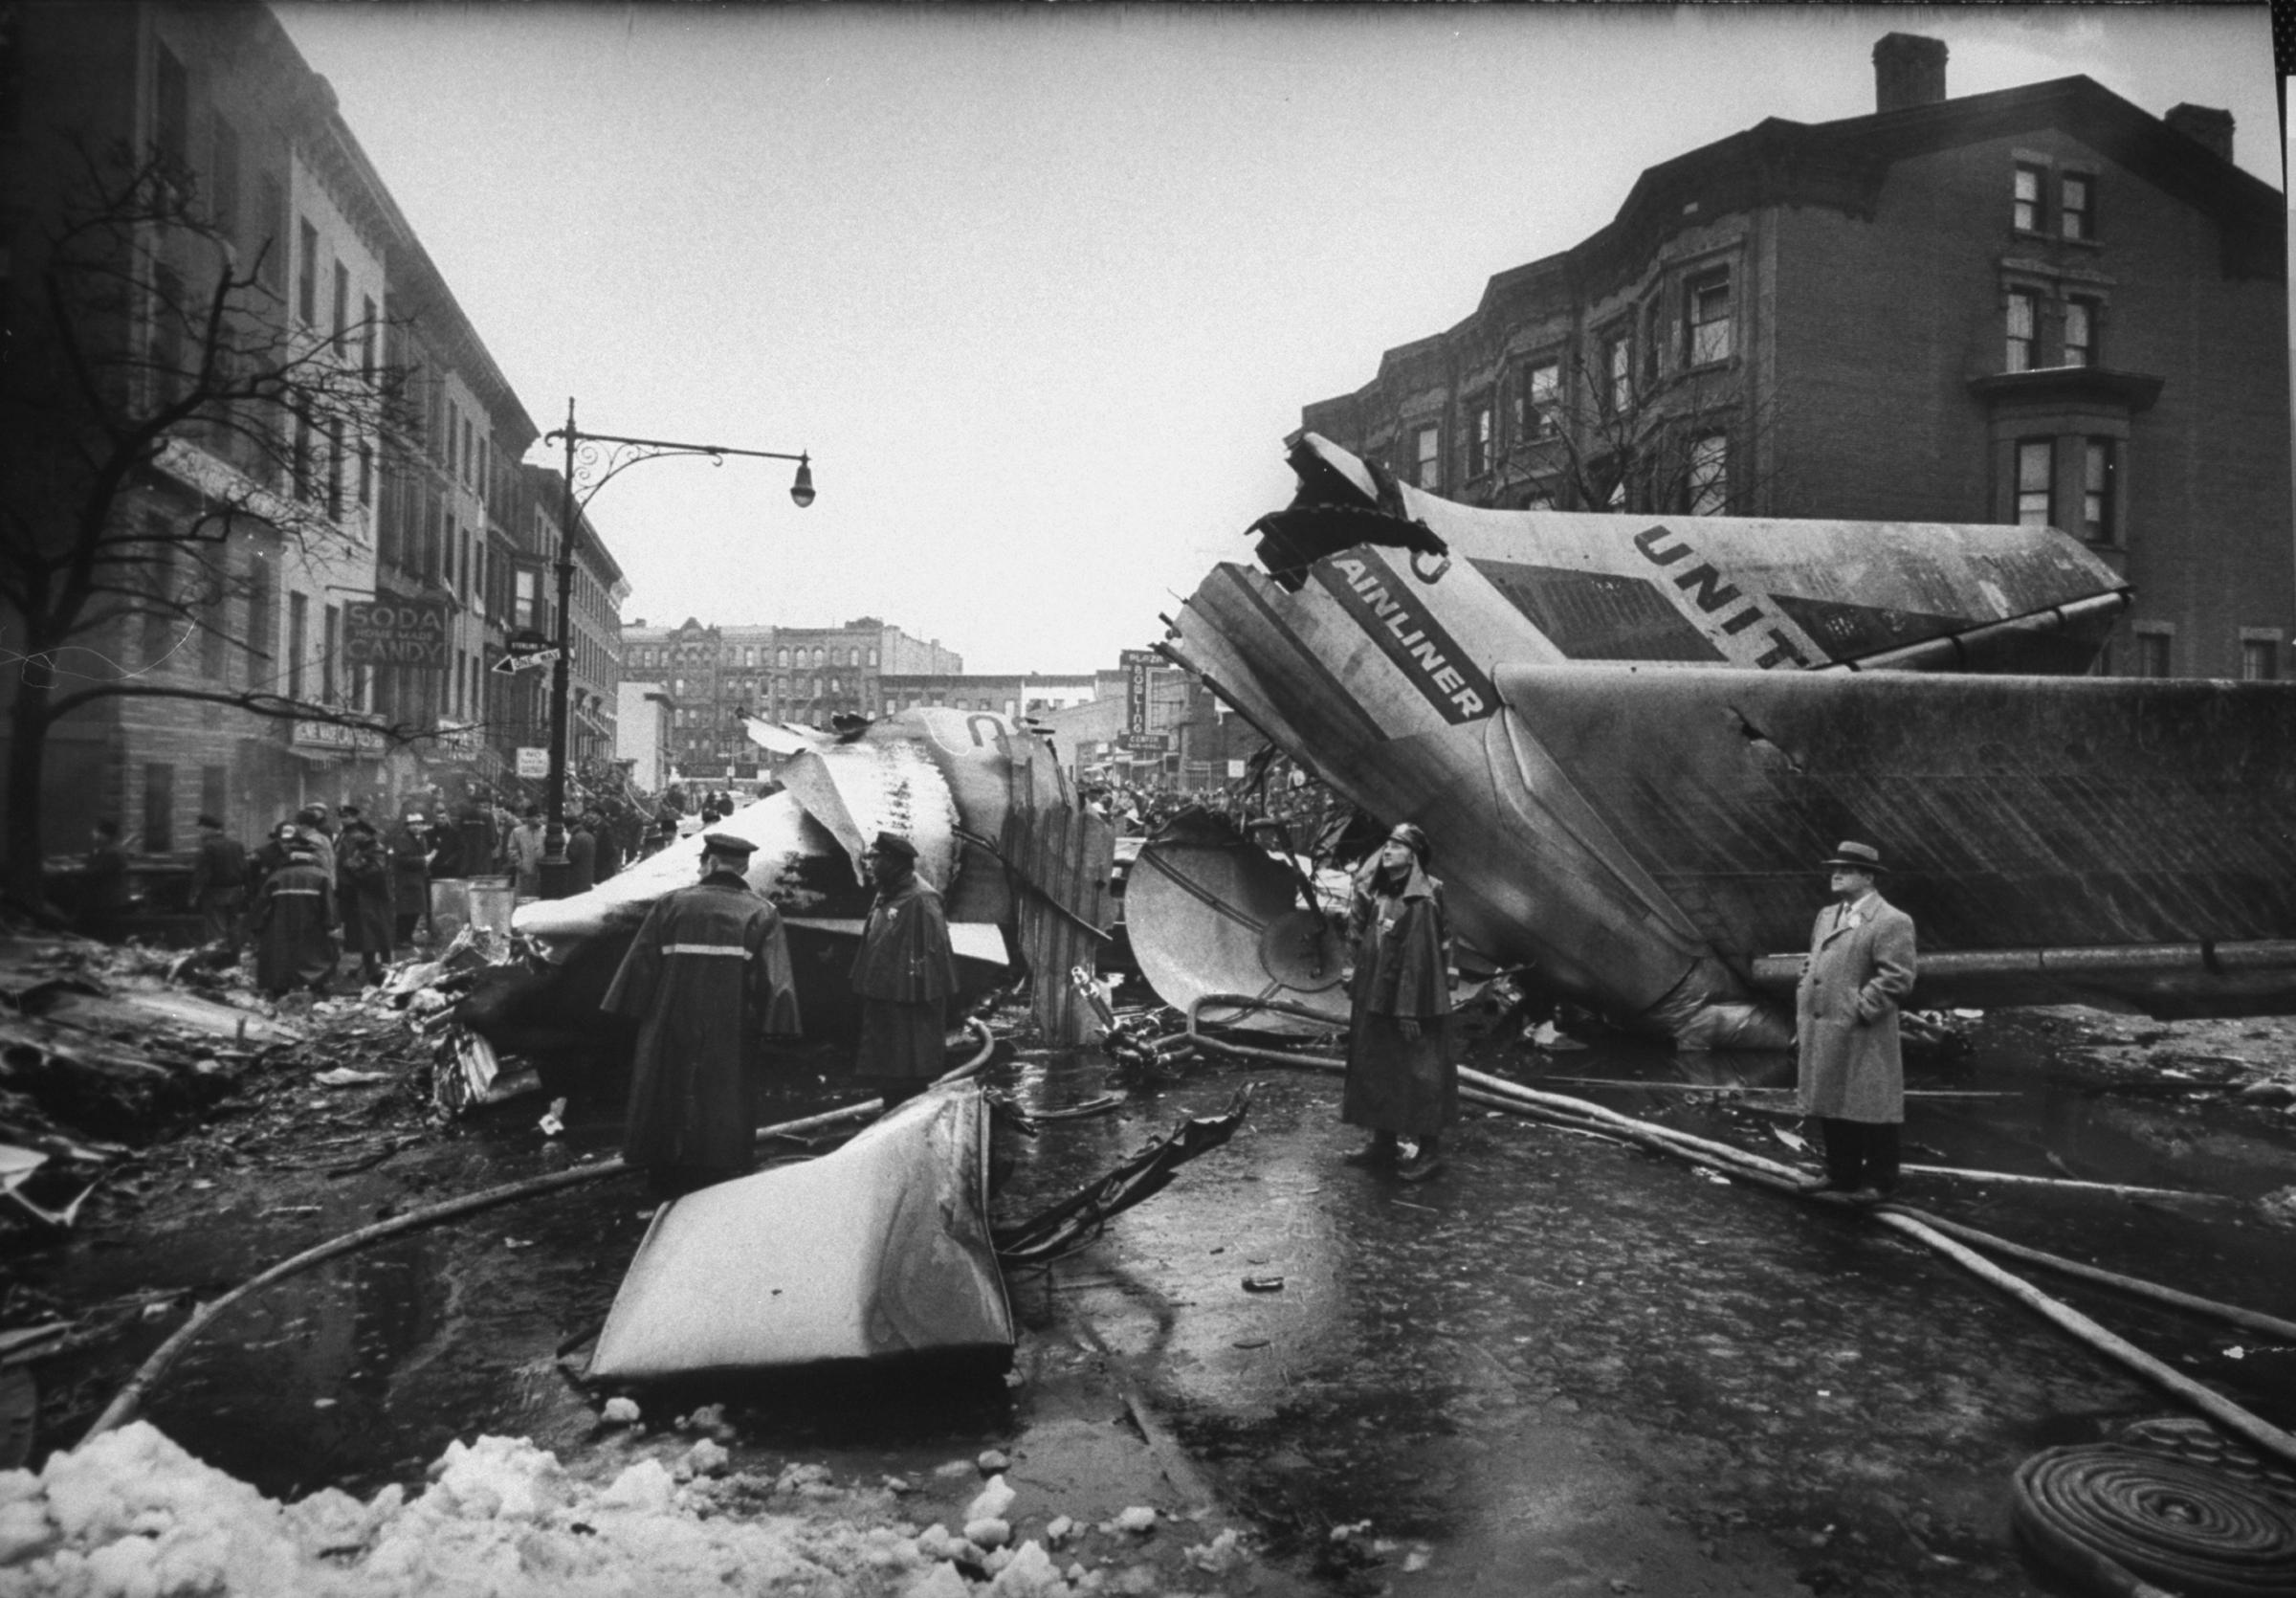 Wreckage litters the streets of Brooklyn after two airliners collide above the borough, December 1960.